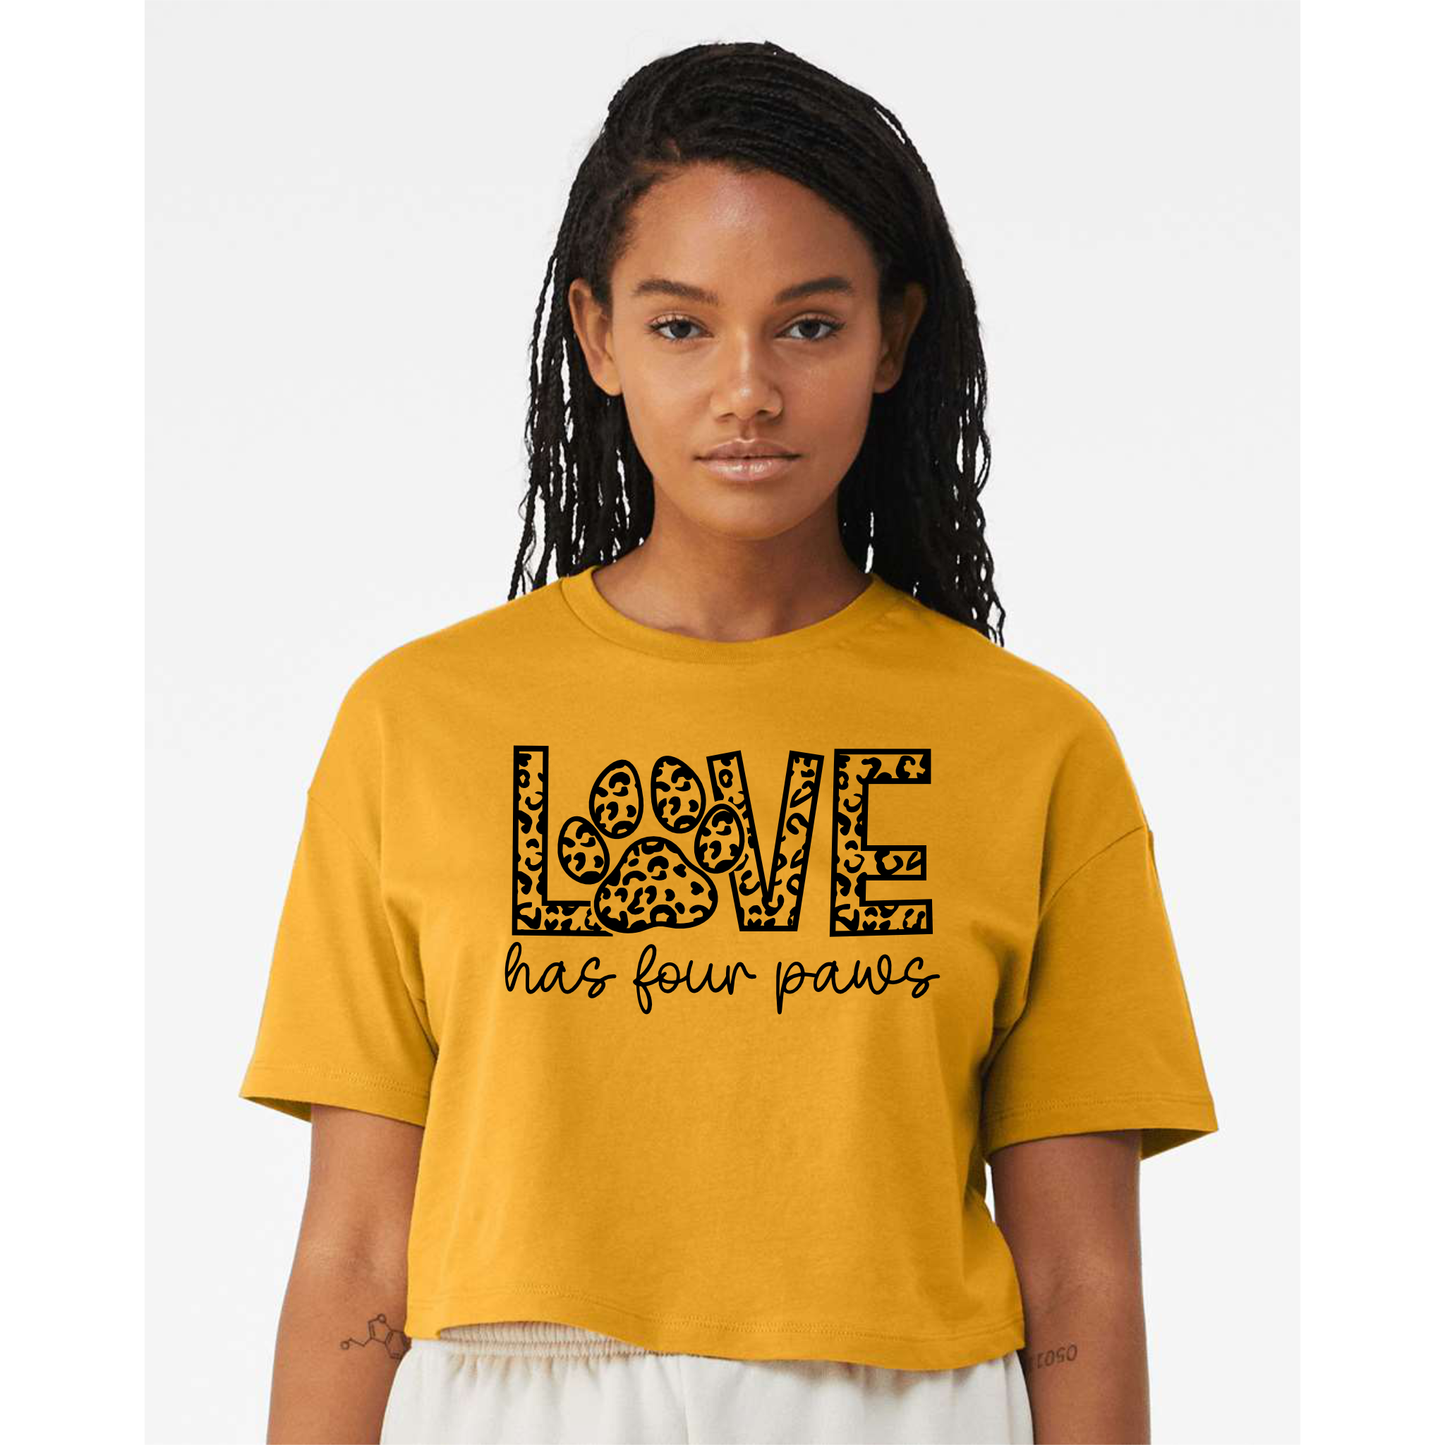 CROP TOP -  Love Has Four Paws Tee